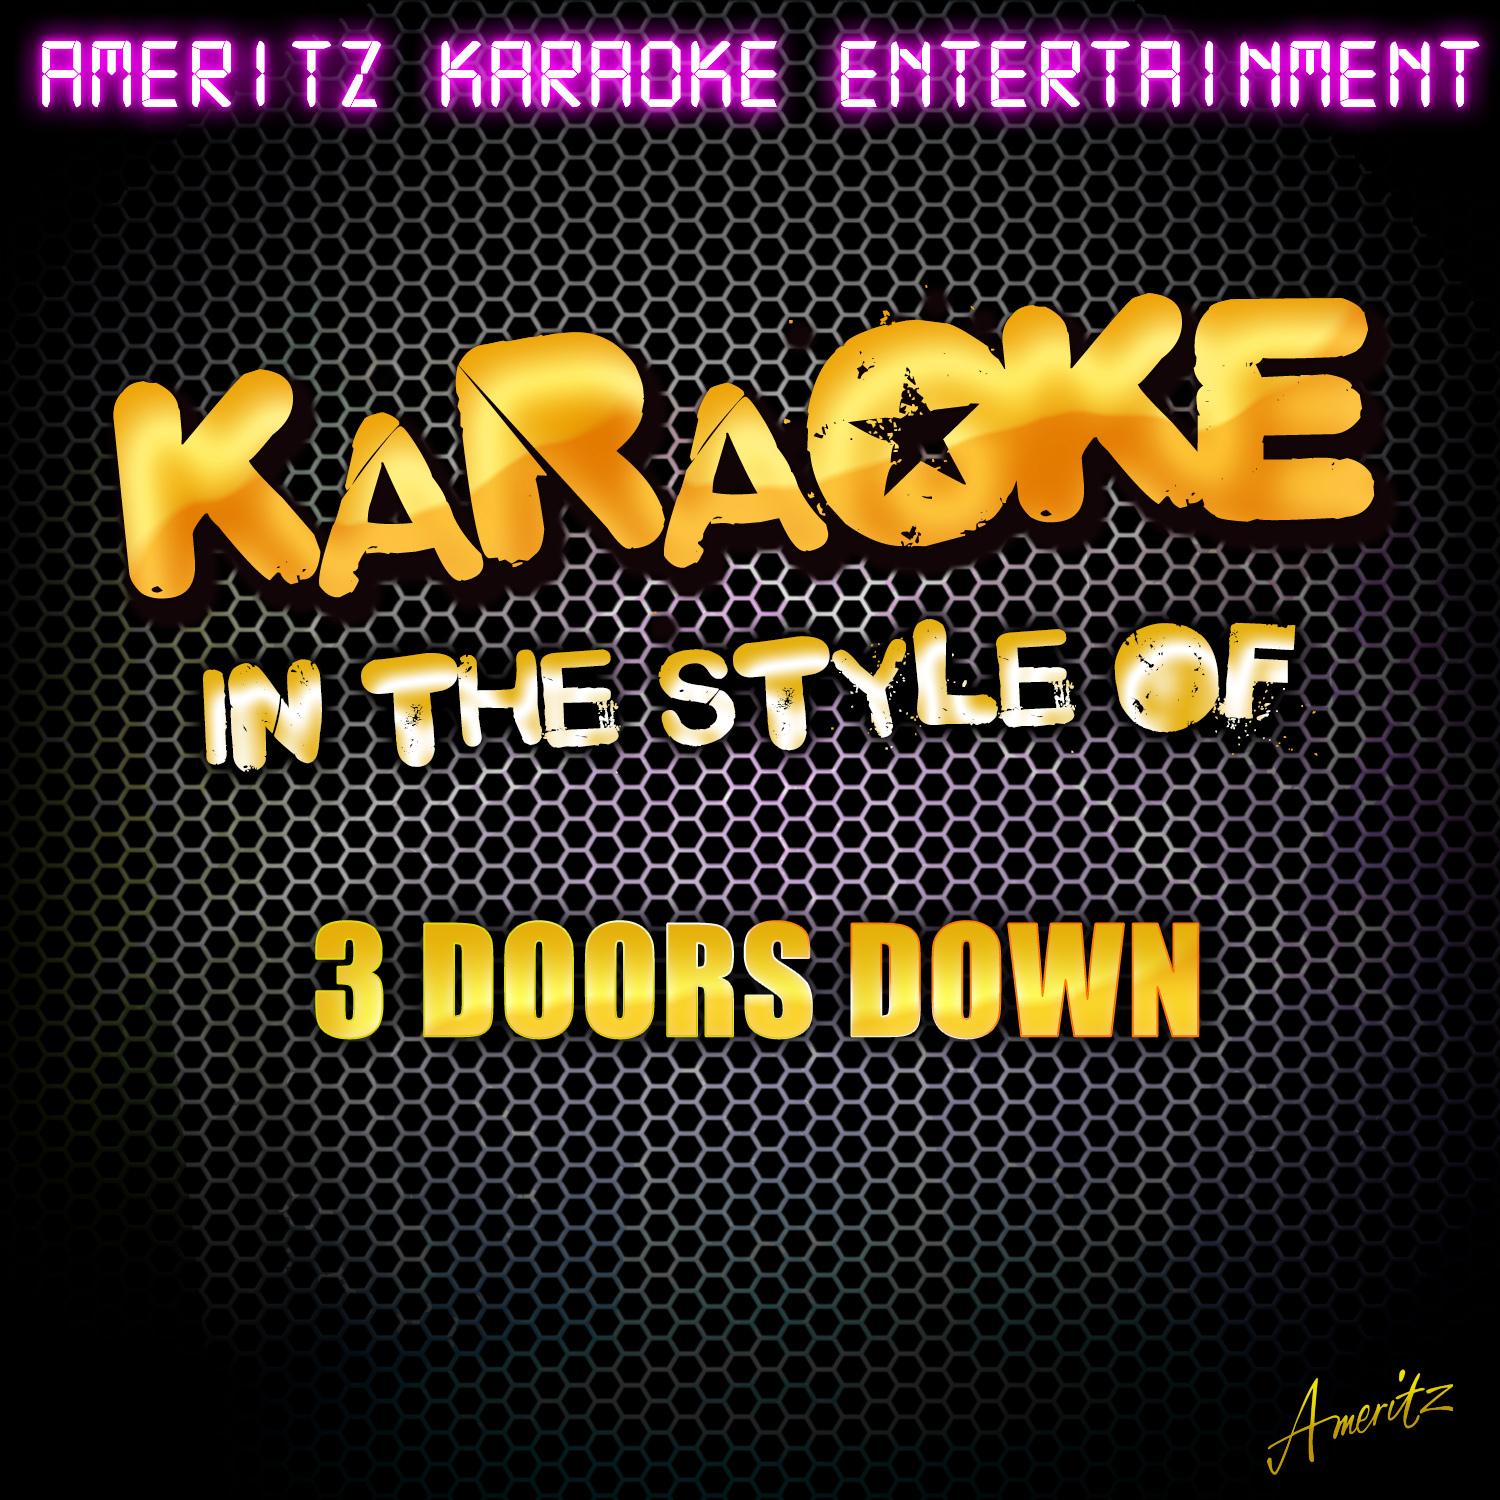 When I'm Gone (In the Style of 3 Doors Down) [Karaoke Version]